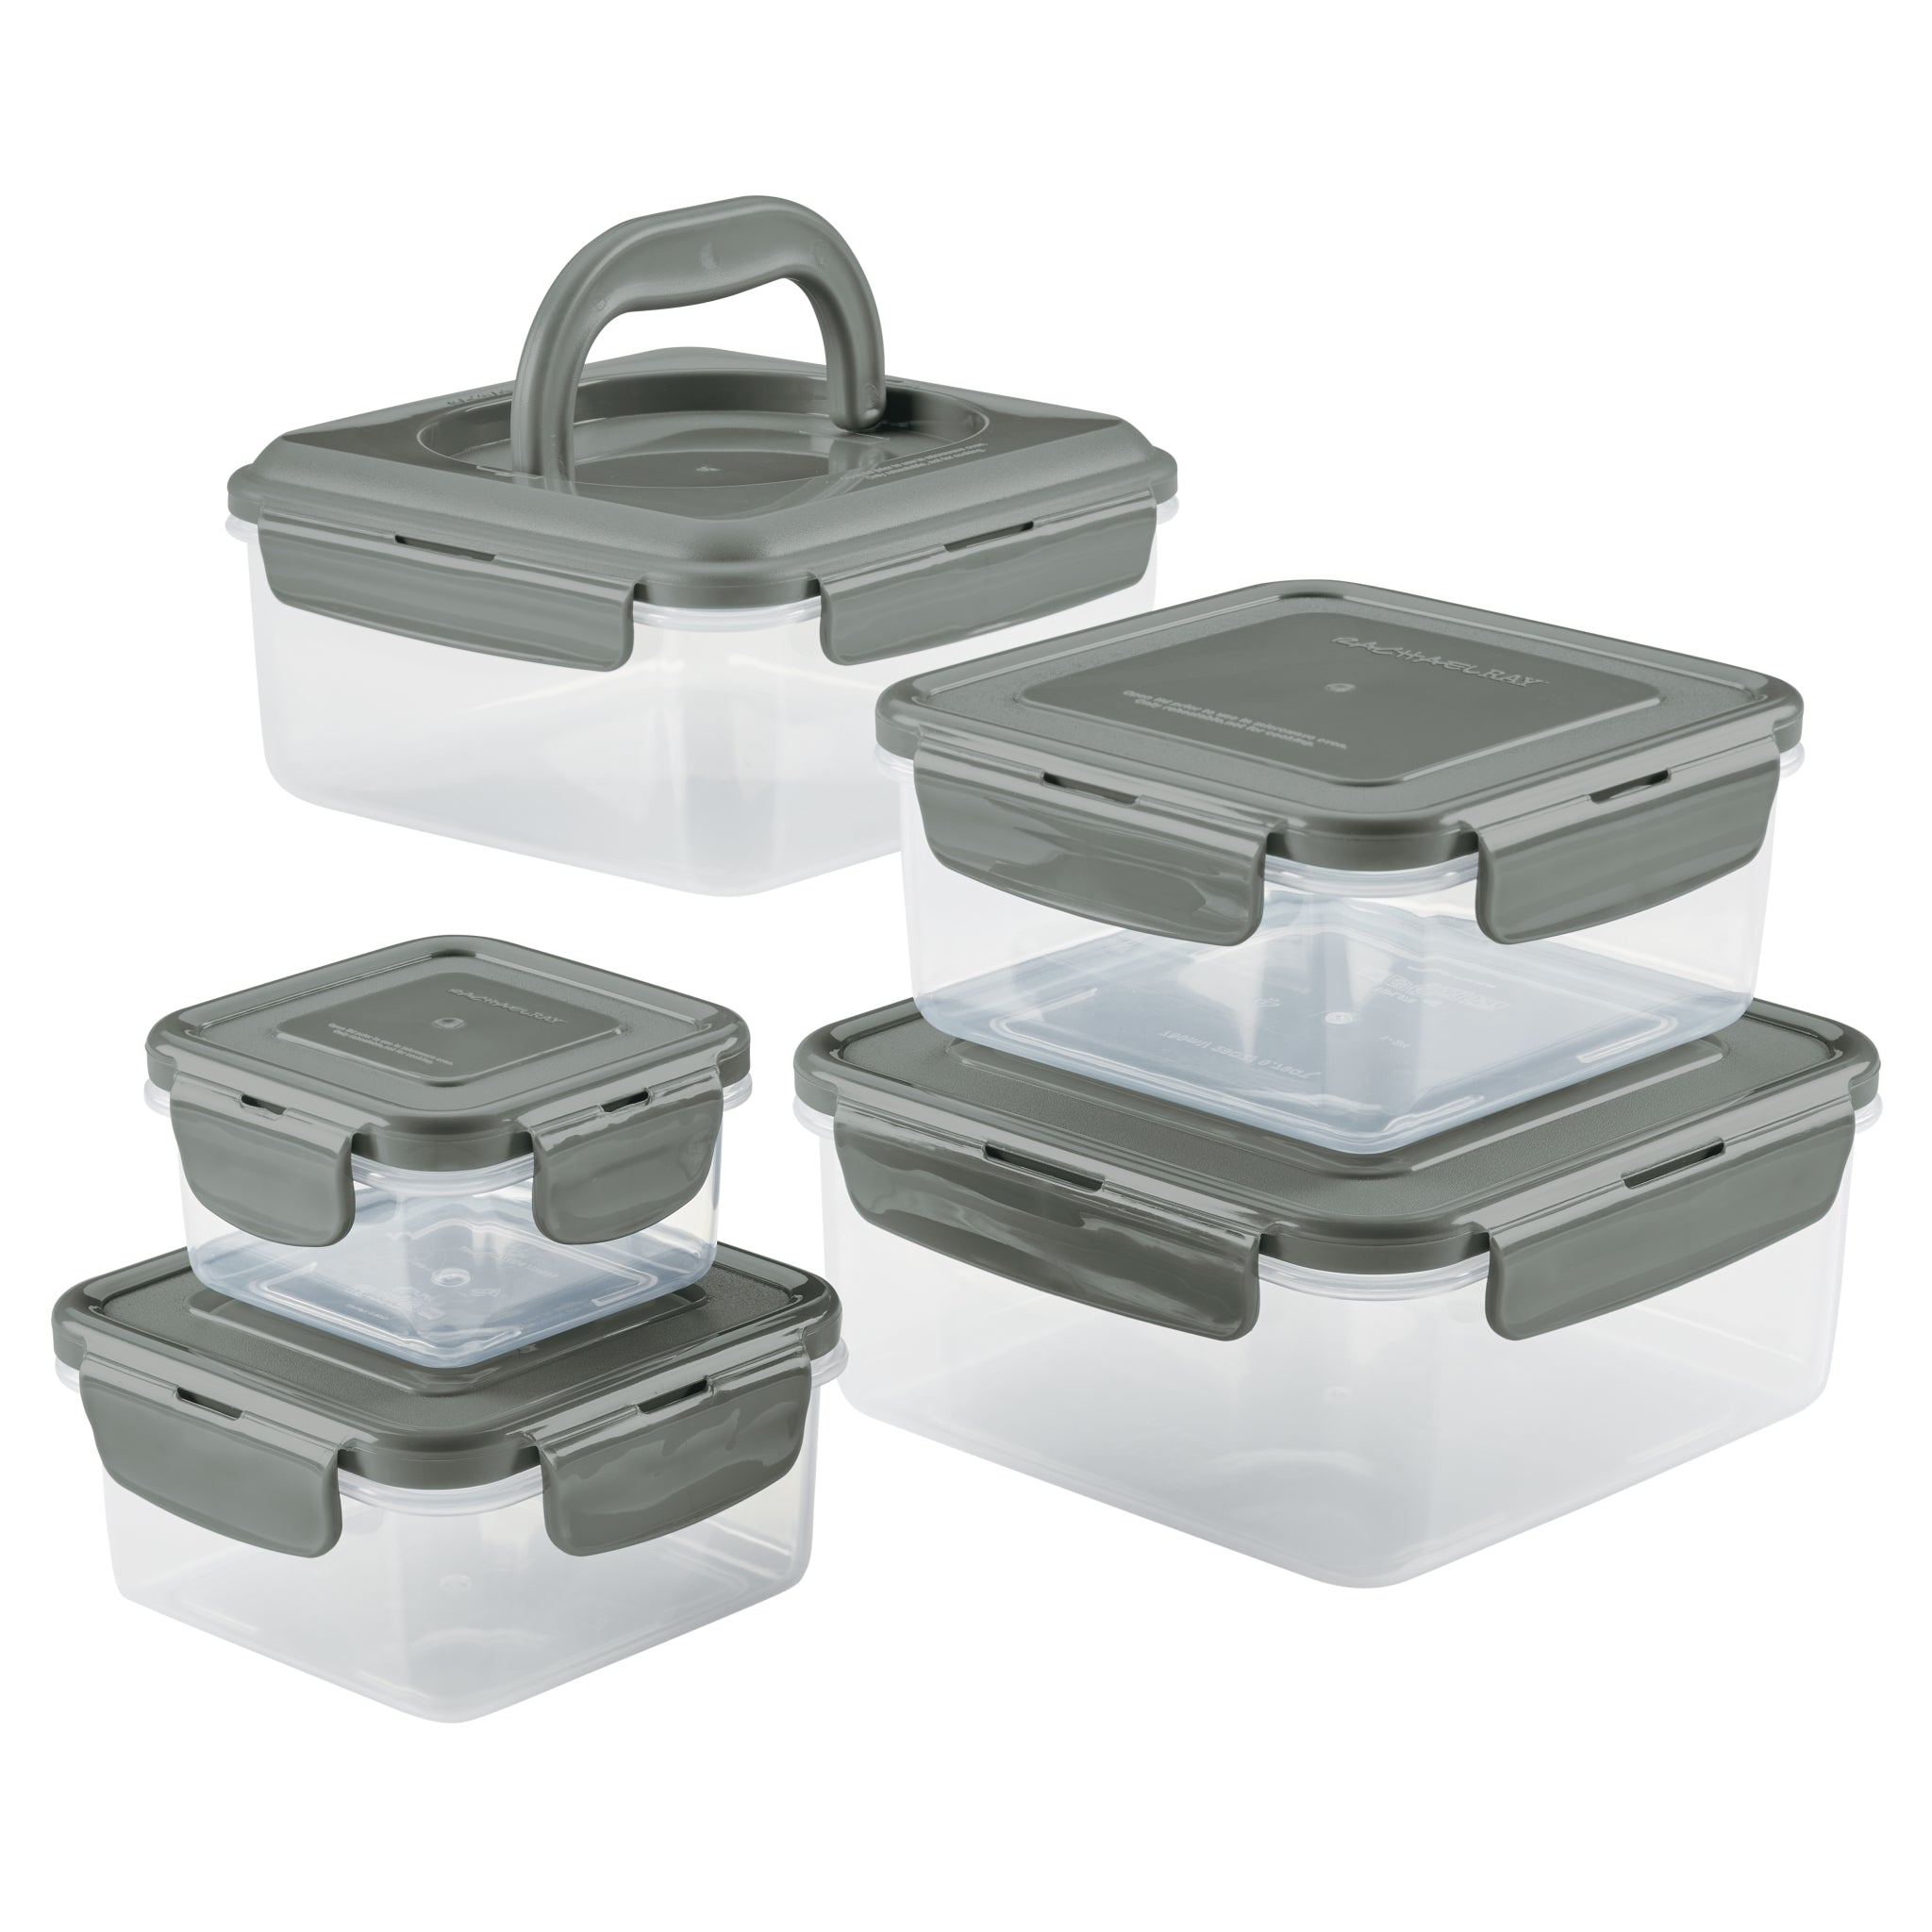 Food Storage Containers - Food Storage - Food Containers - IKEA